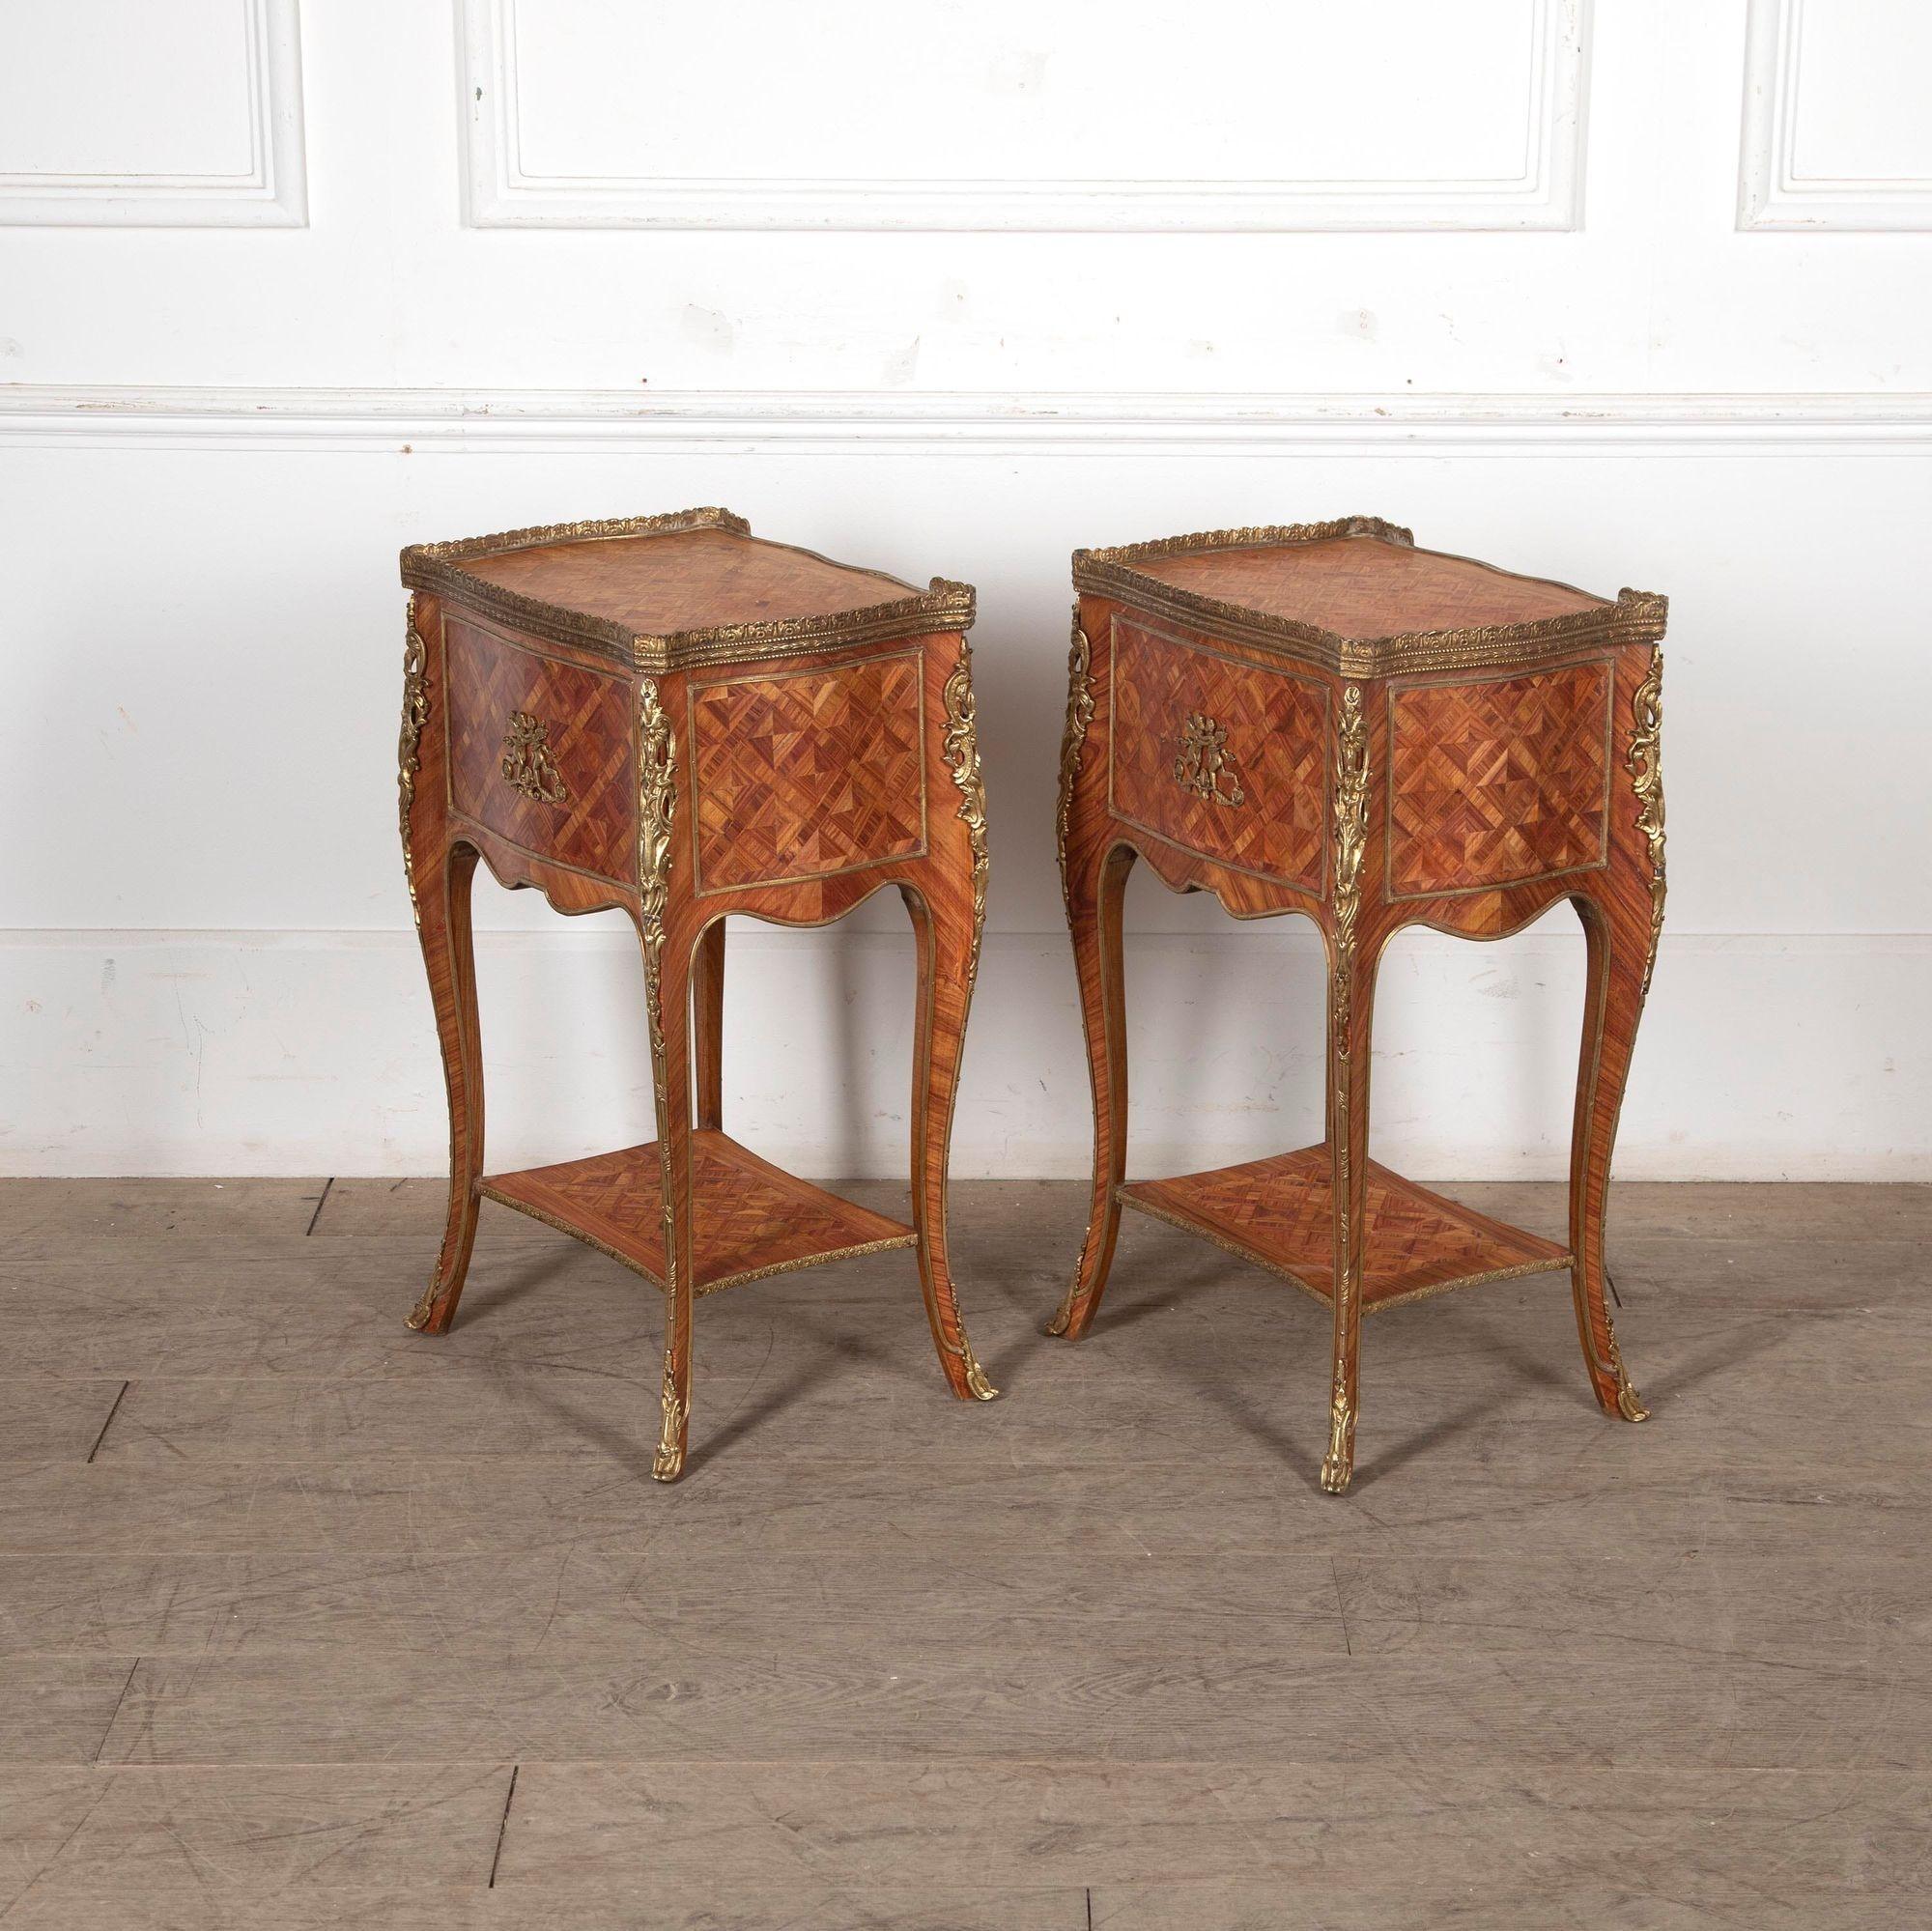 Fabulous pair of 20th century Italian marquetry and ormolu bedside tables.
Both are composed of bleached kingwood with a brass gallery and lots of ormolu mounts including to the shaped backs.
Circa 1920.